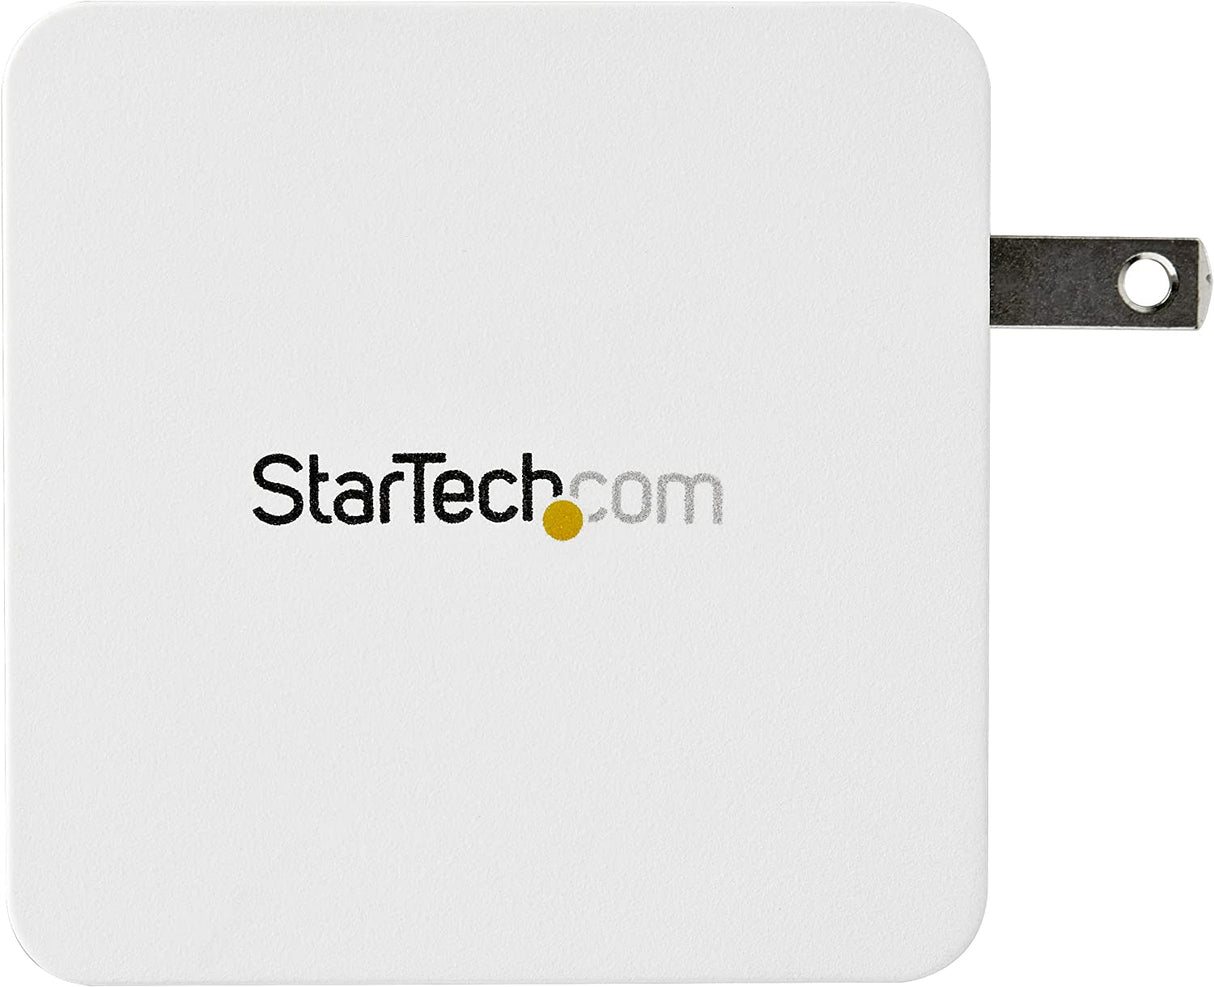 Startech 1 Port USB C Wall Charger - 60W Power Delivery - USB C Power Adapter for Laptop or Cell Phone (WCH1C)